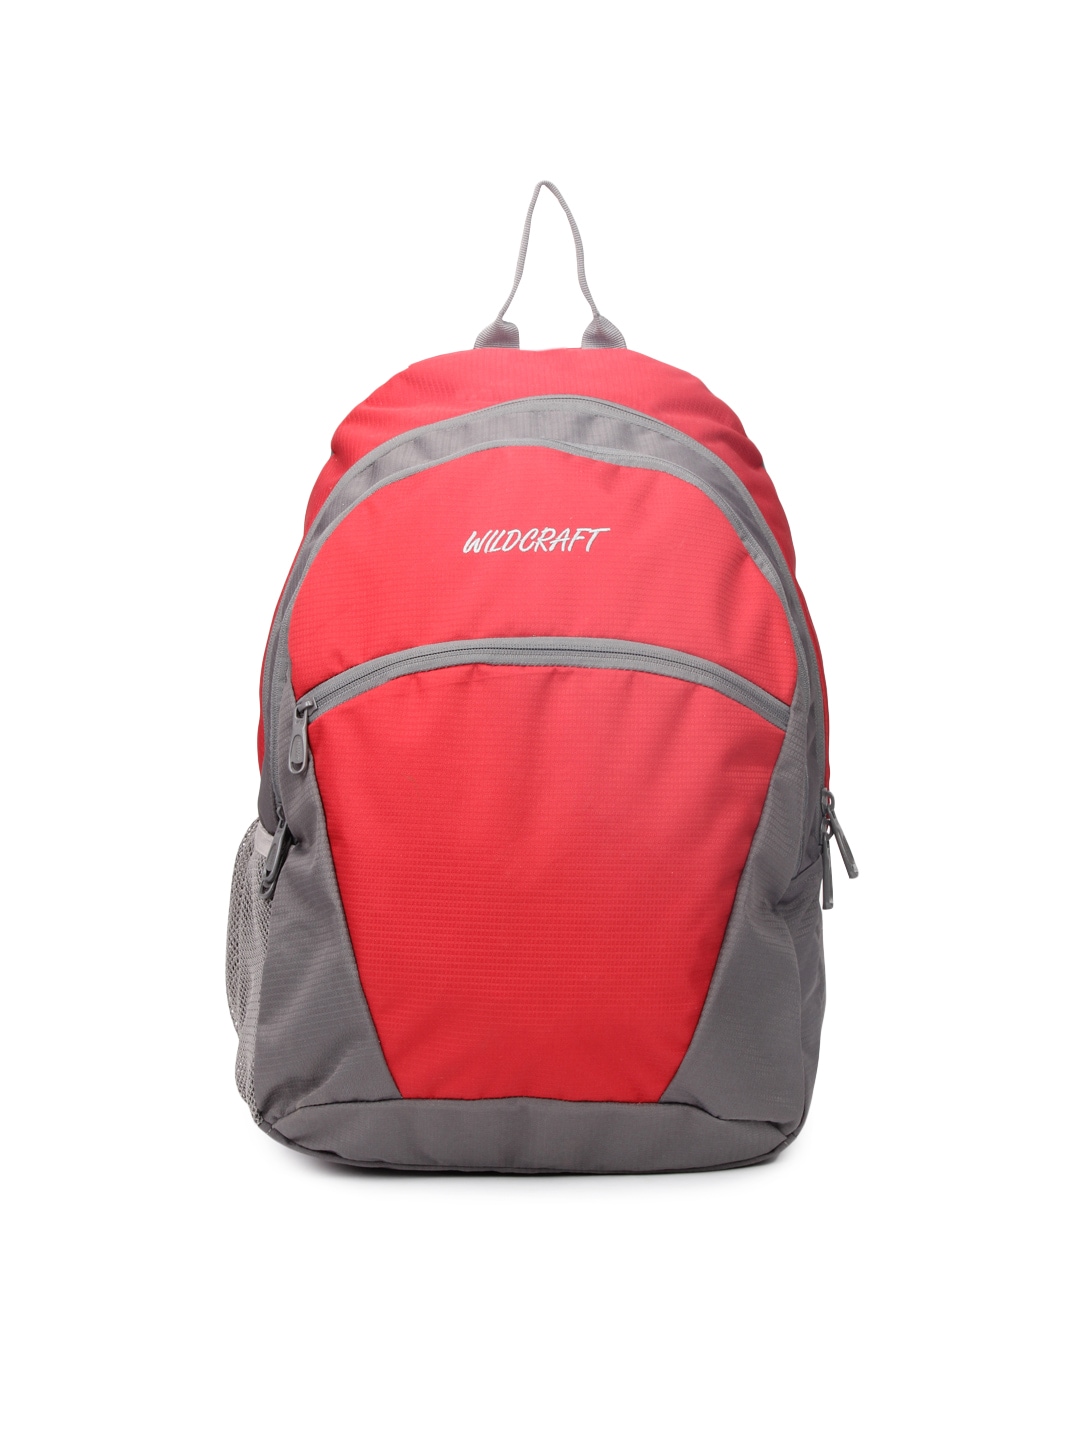 Wildcraft Unisex Acute Red and Grey Backpack